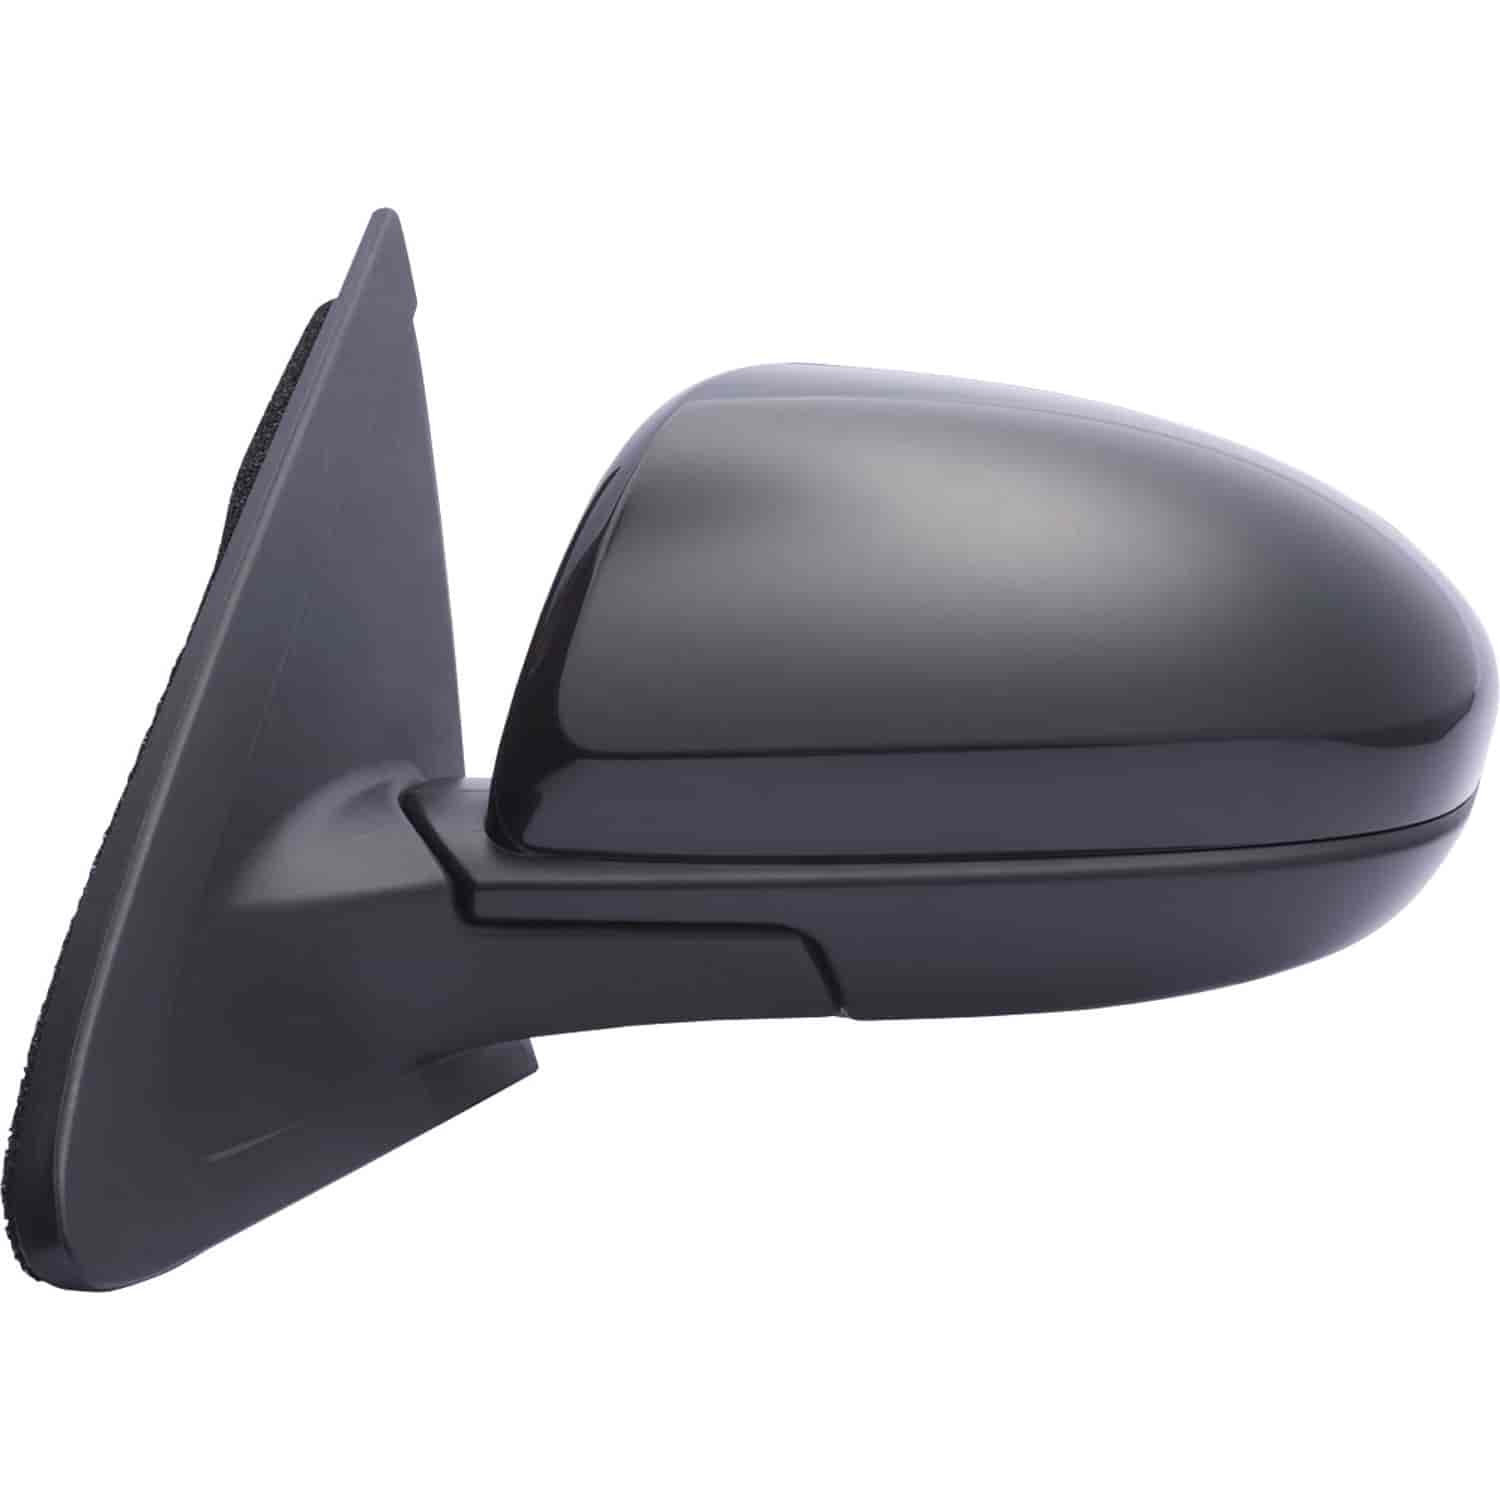 OEM Style Replacement mirror for 10-13 Mazda 3 w/o turn signal driver side mirror tested to fit and